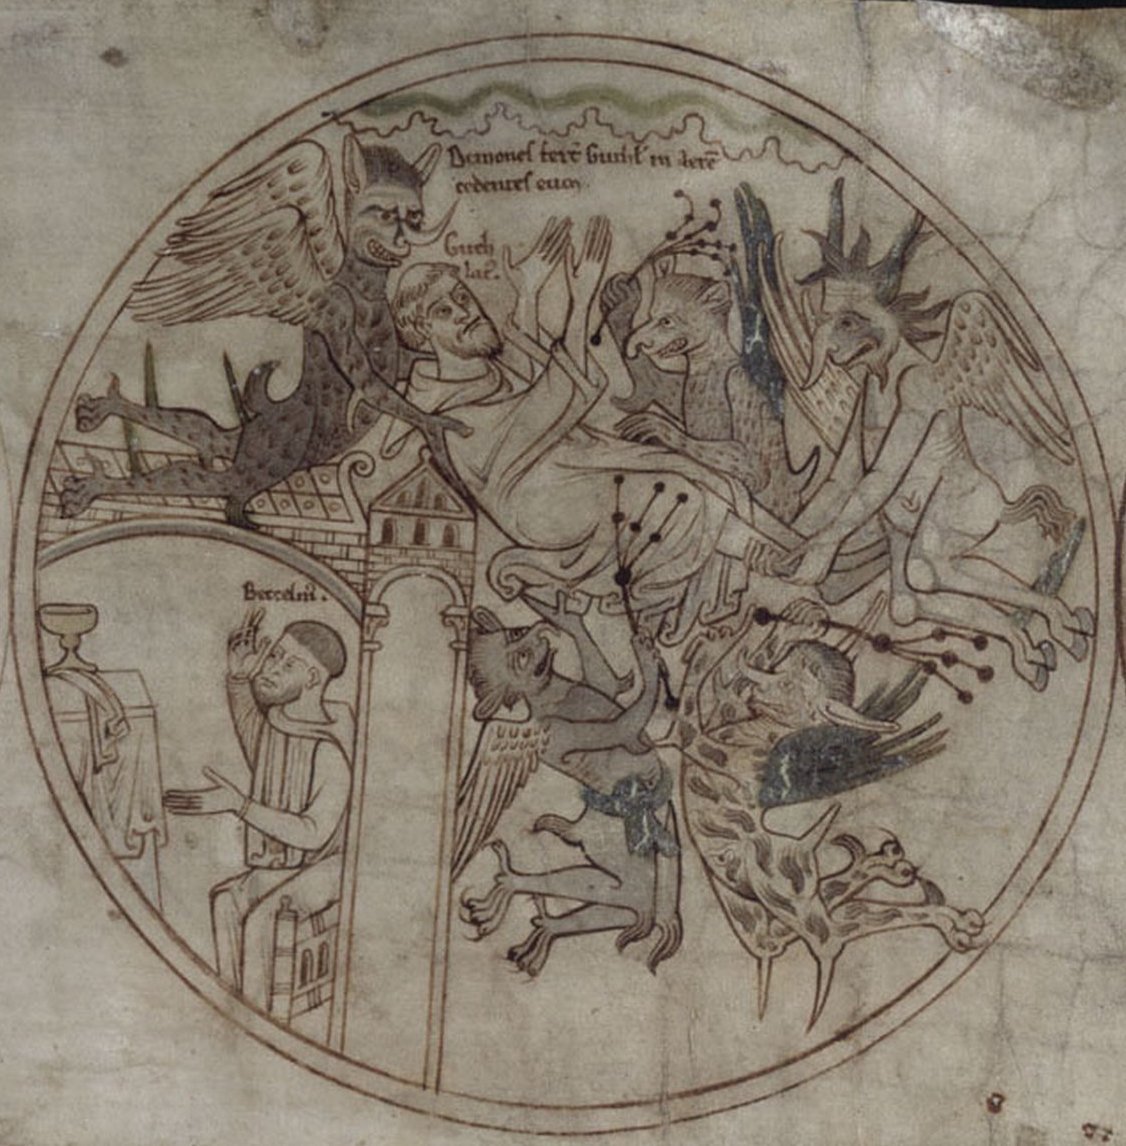 Saint Guthlac being tormented by demons, the Life of Saint Guthlac, Crowland, Lincolnshire, 1175-1215. Guthlac’s name represented a shift away from older naming conventions towards a recognisably English one. British Library. Public Domain.